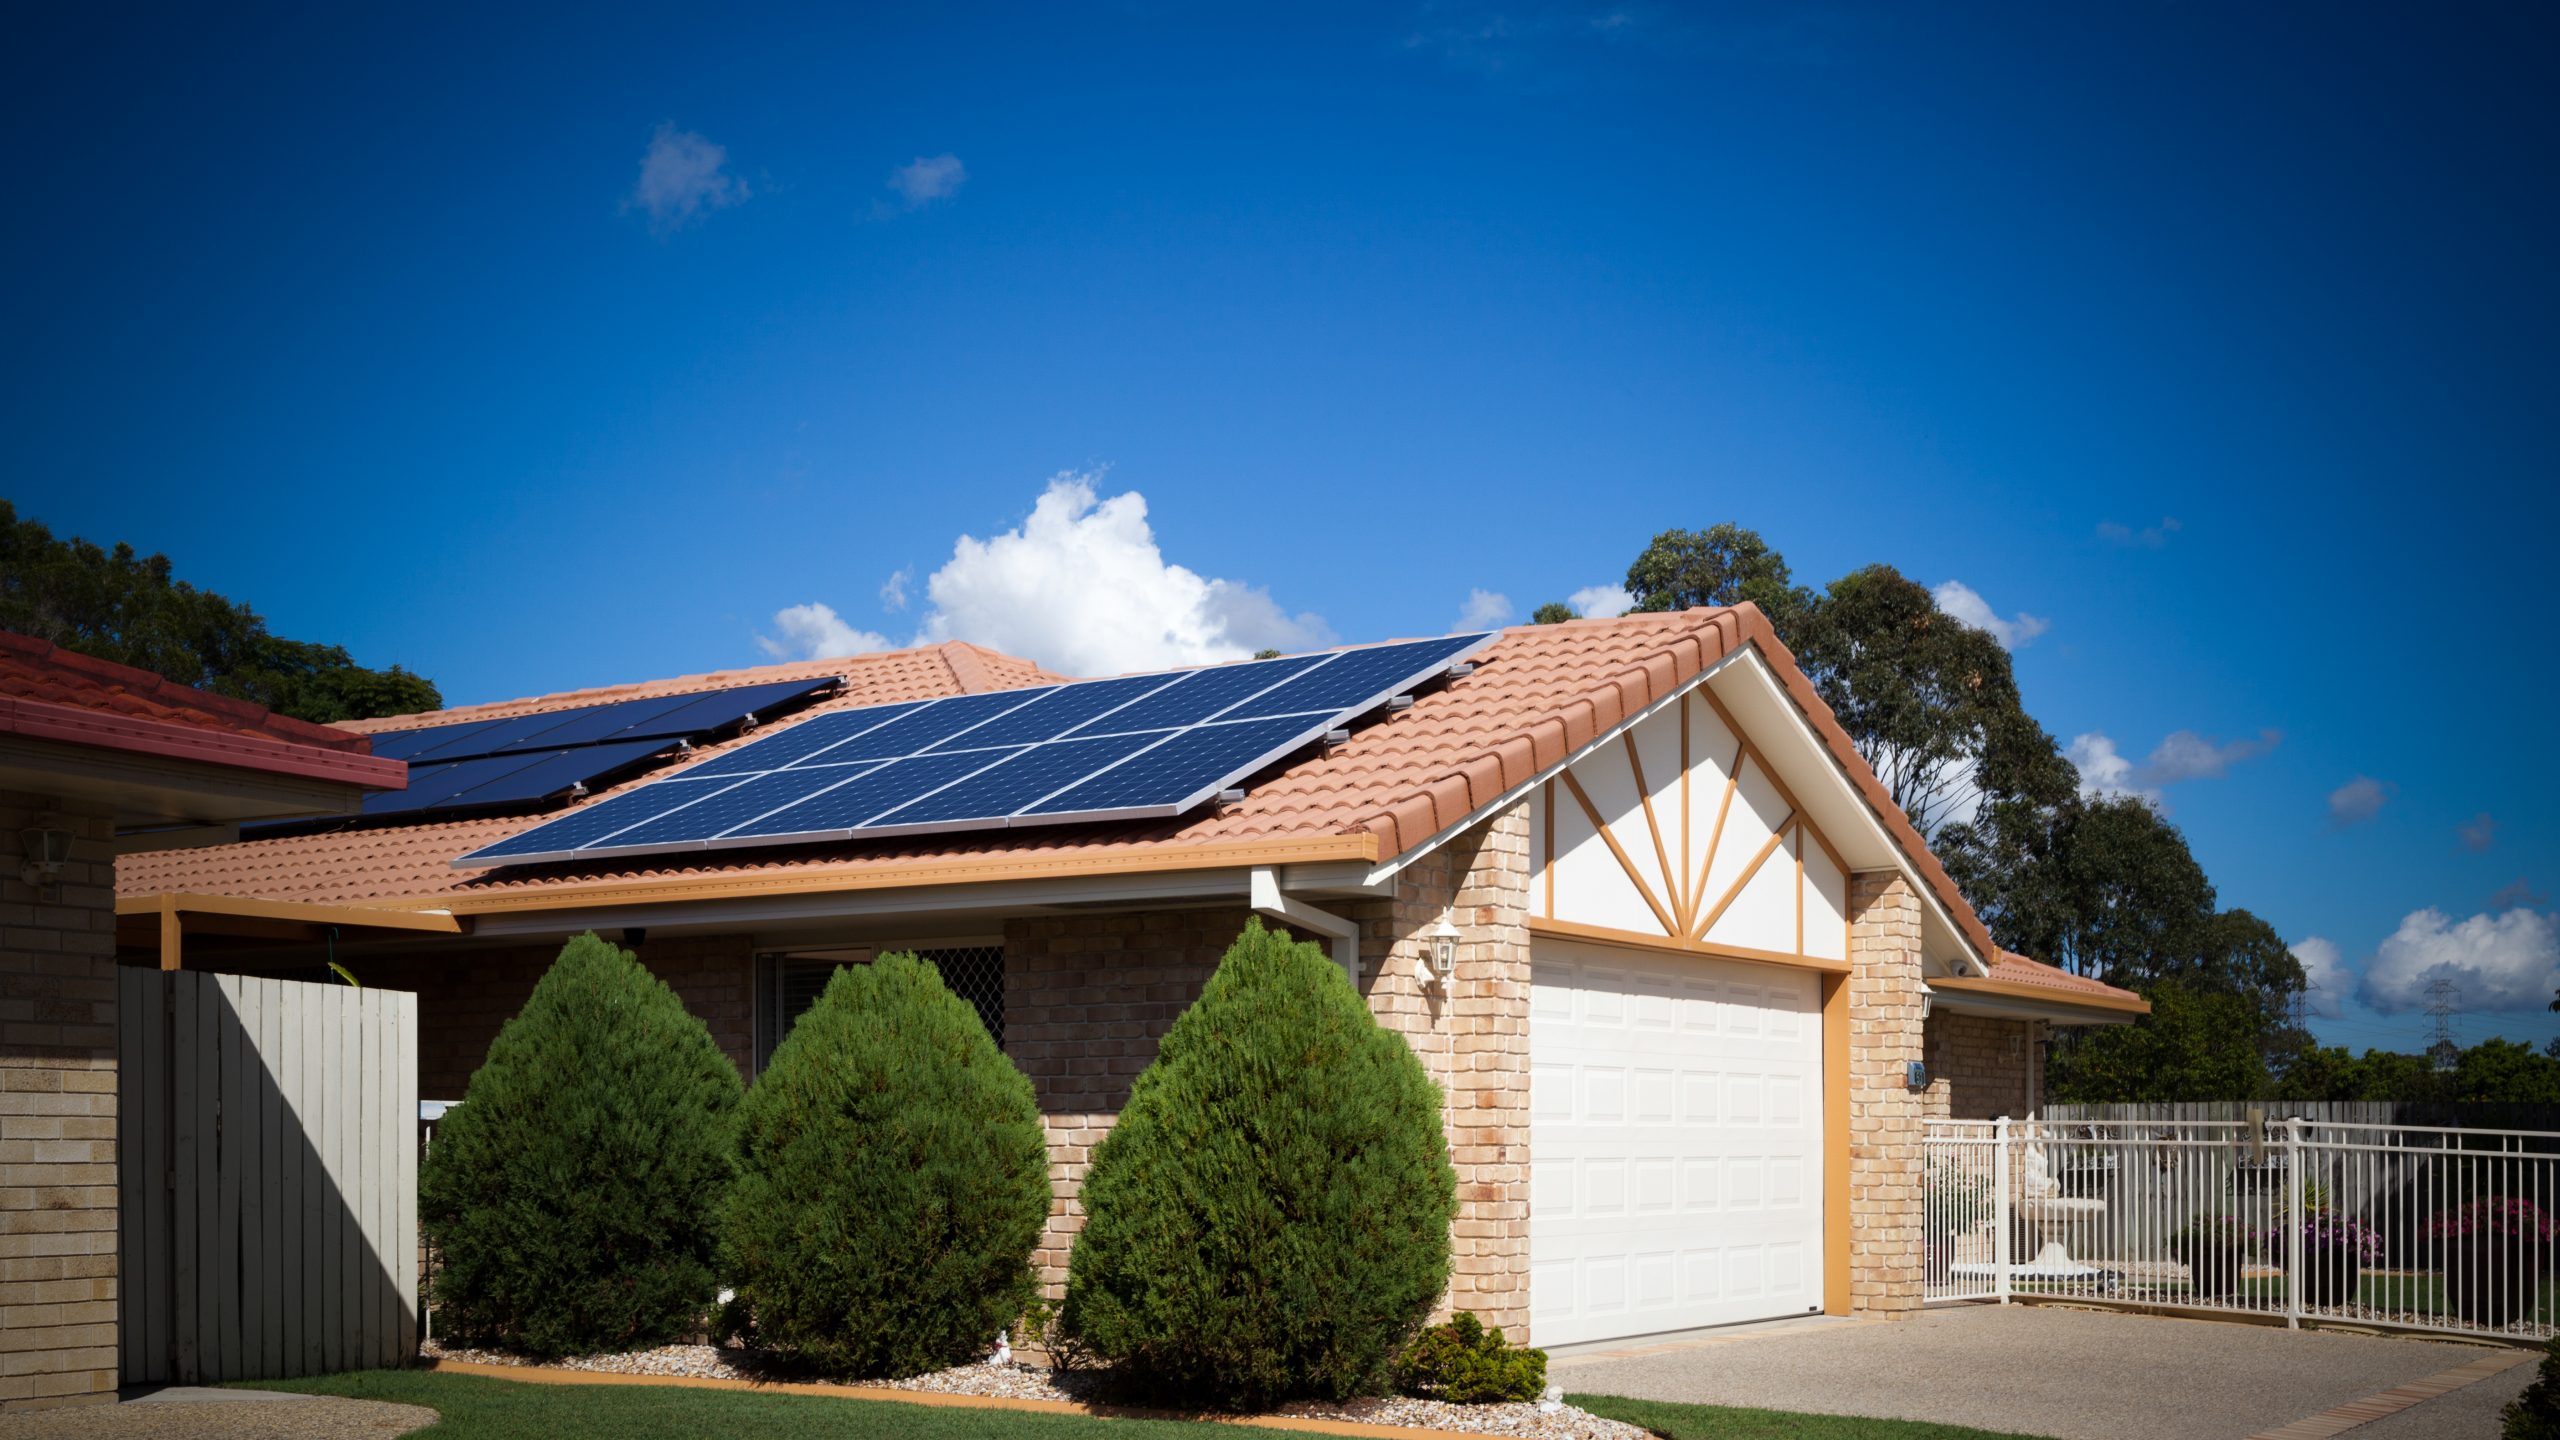 2020-guide-to-solar-panels-in-maryland-solar-tax-credits-srecs-more